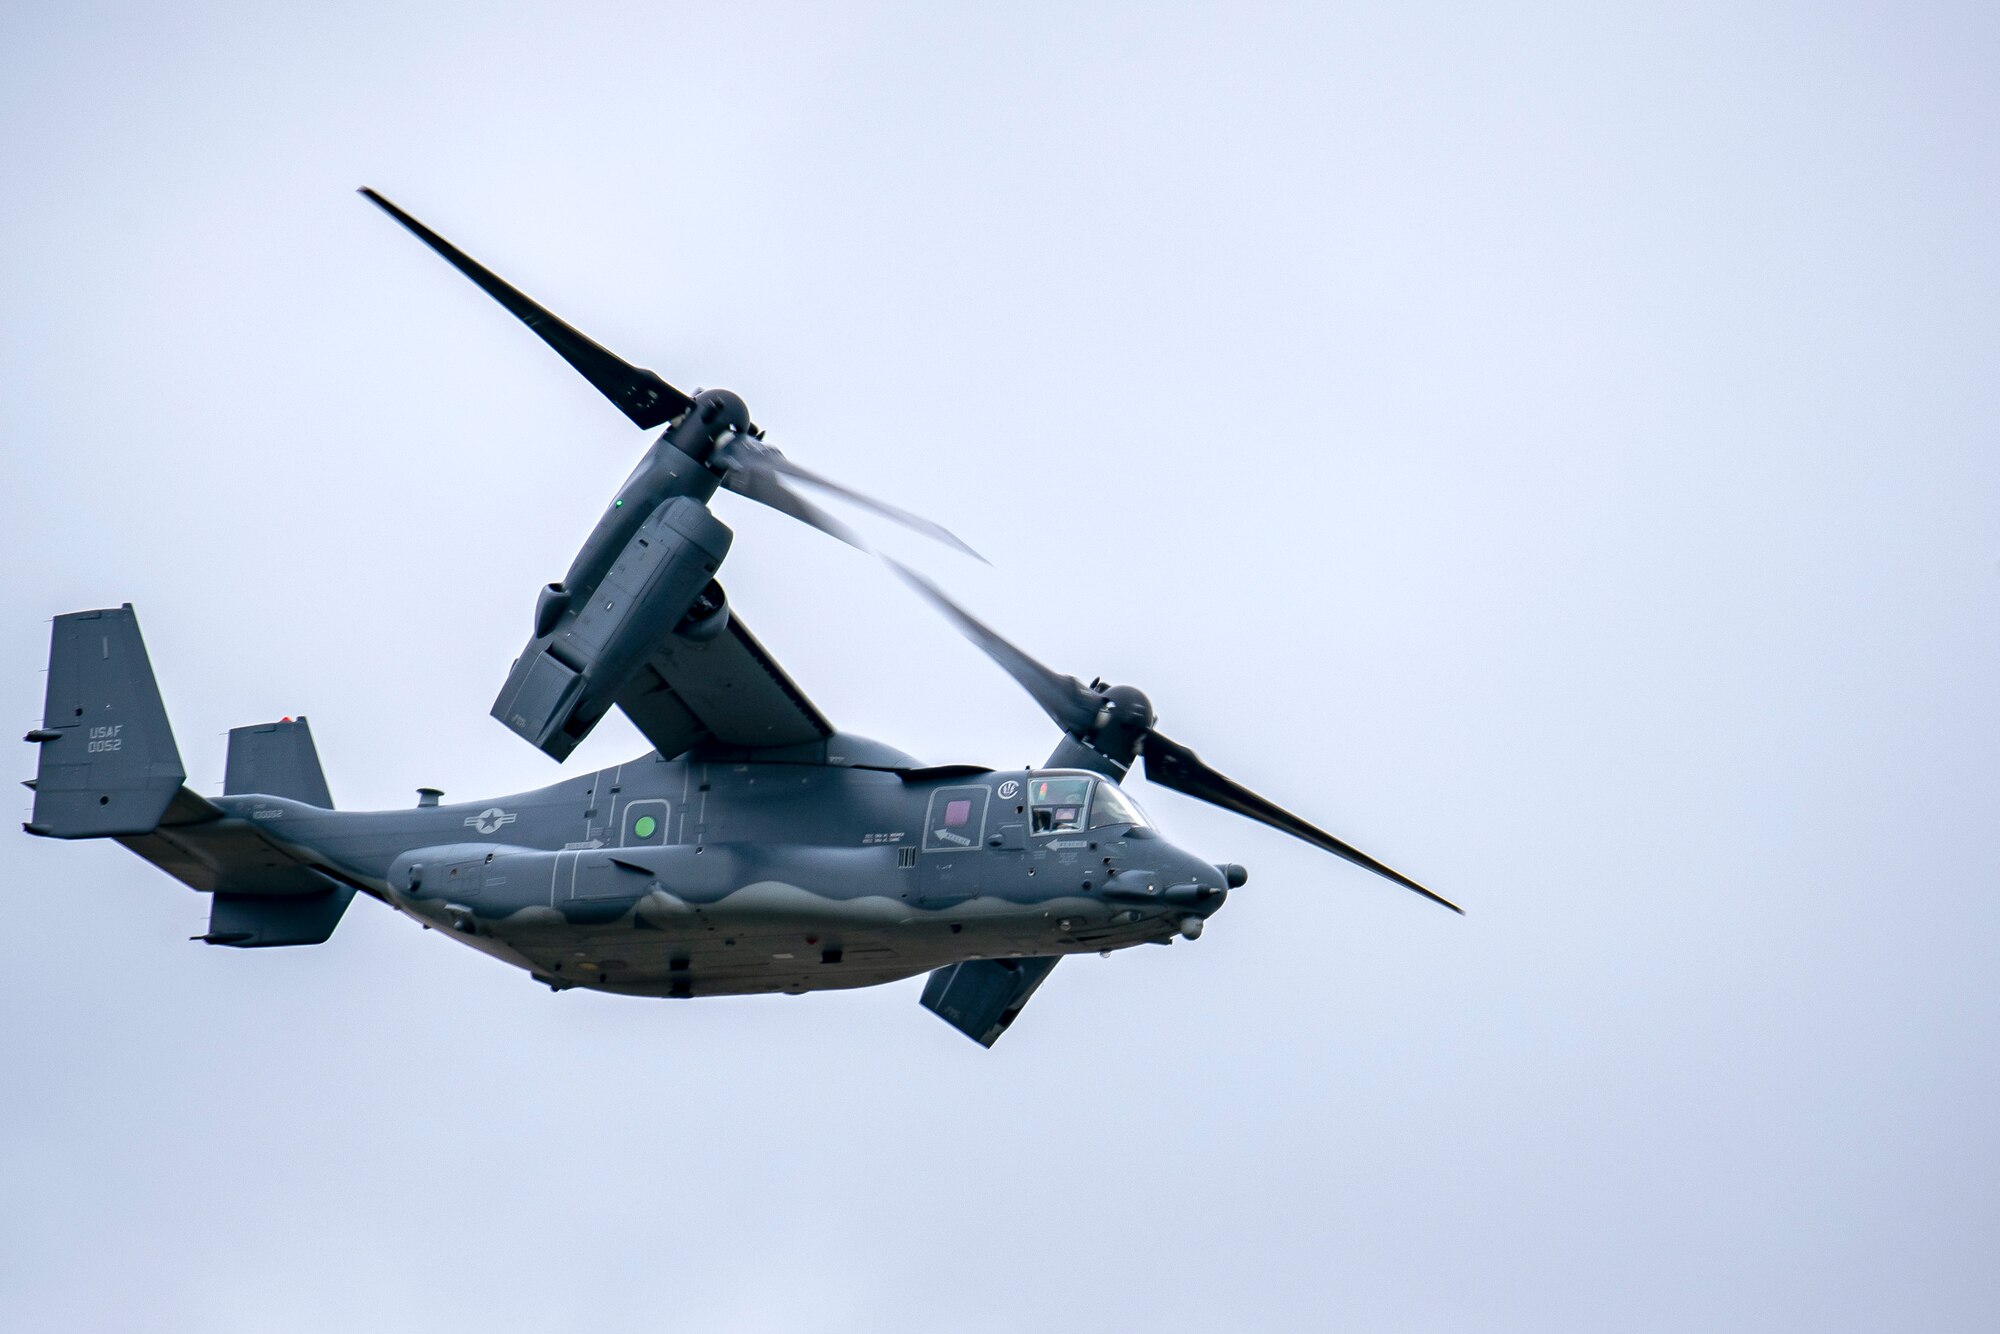 A CV-22A Osprey assigned to the 352d Special Operations Wing flies overhead during an Agile Combat Employment exercise at RAF Fairford, England, Sept. 13, 2021. Airmen from the 501st Combat Support Wing, 100th Air Refueling Wing and 352d SOW partnered to conduct an ACE exercise to test their overall readiness and lethality capabilities. The exercise enables U.S. forces in Europe to operate from locations with varying levels of capacity and support. (U.S. Air Force photo by Senior Airman Eugene Oliver)